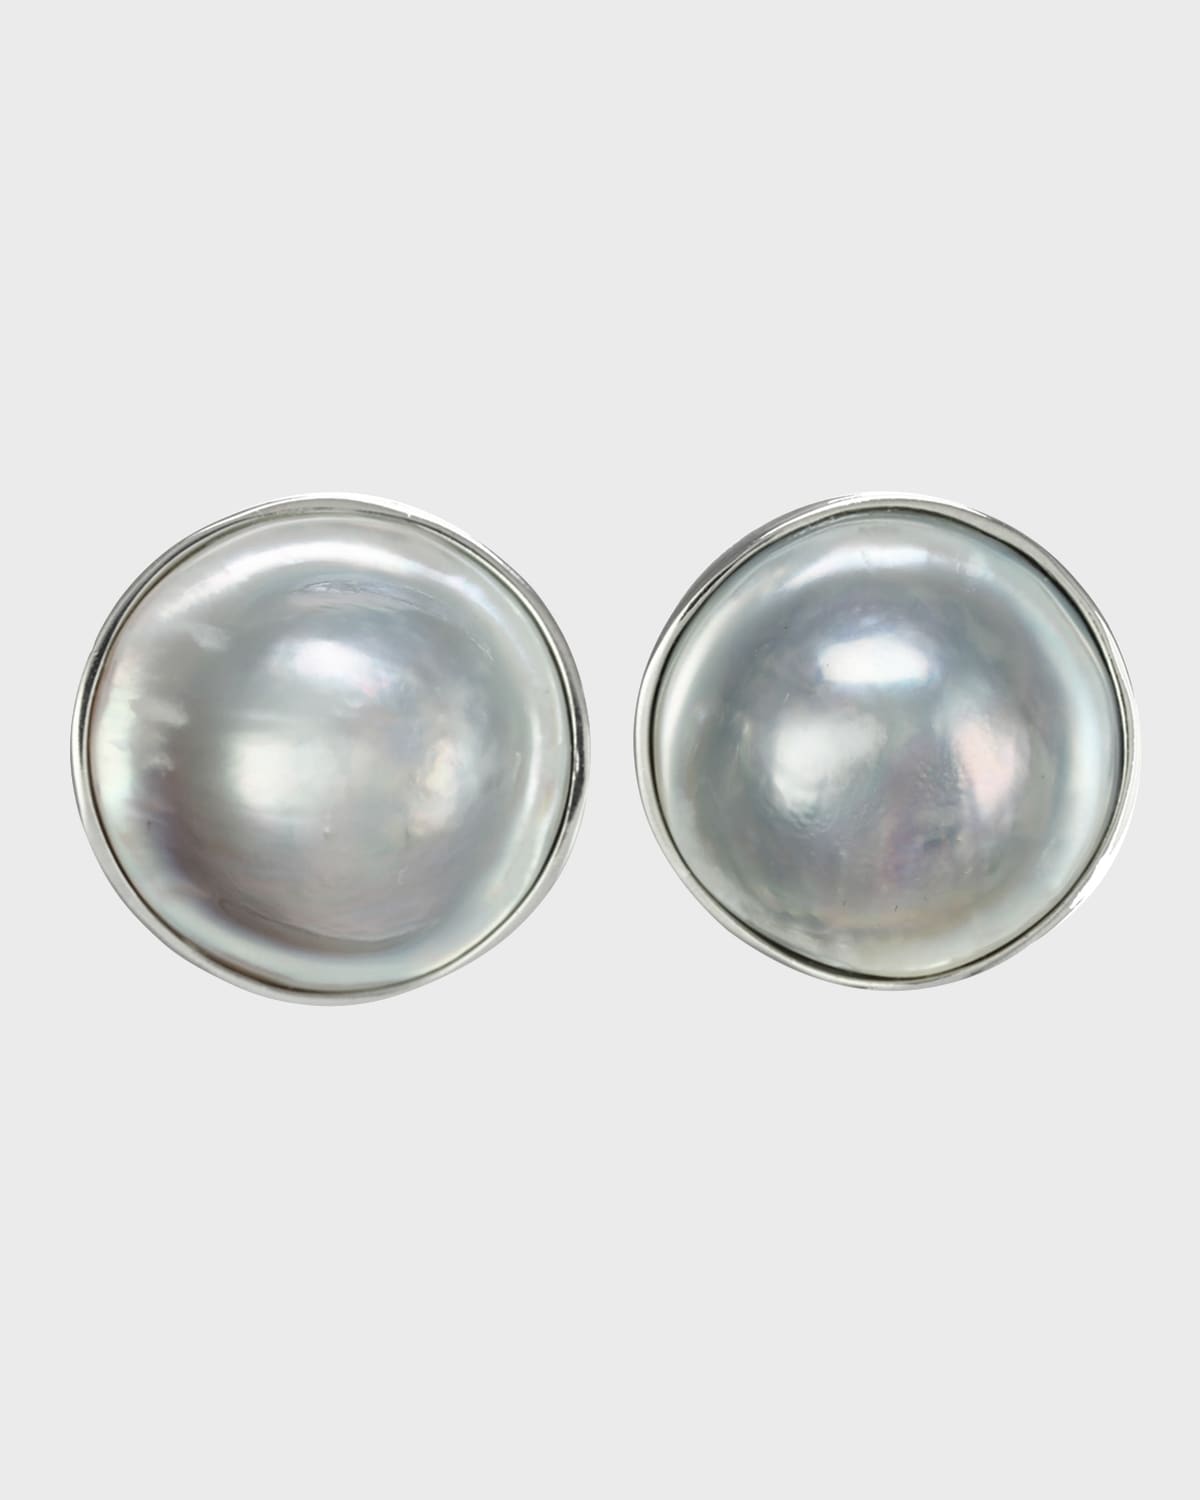 Grey Mabé Pearl Earrings with Sterling Silver